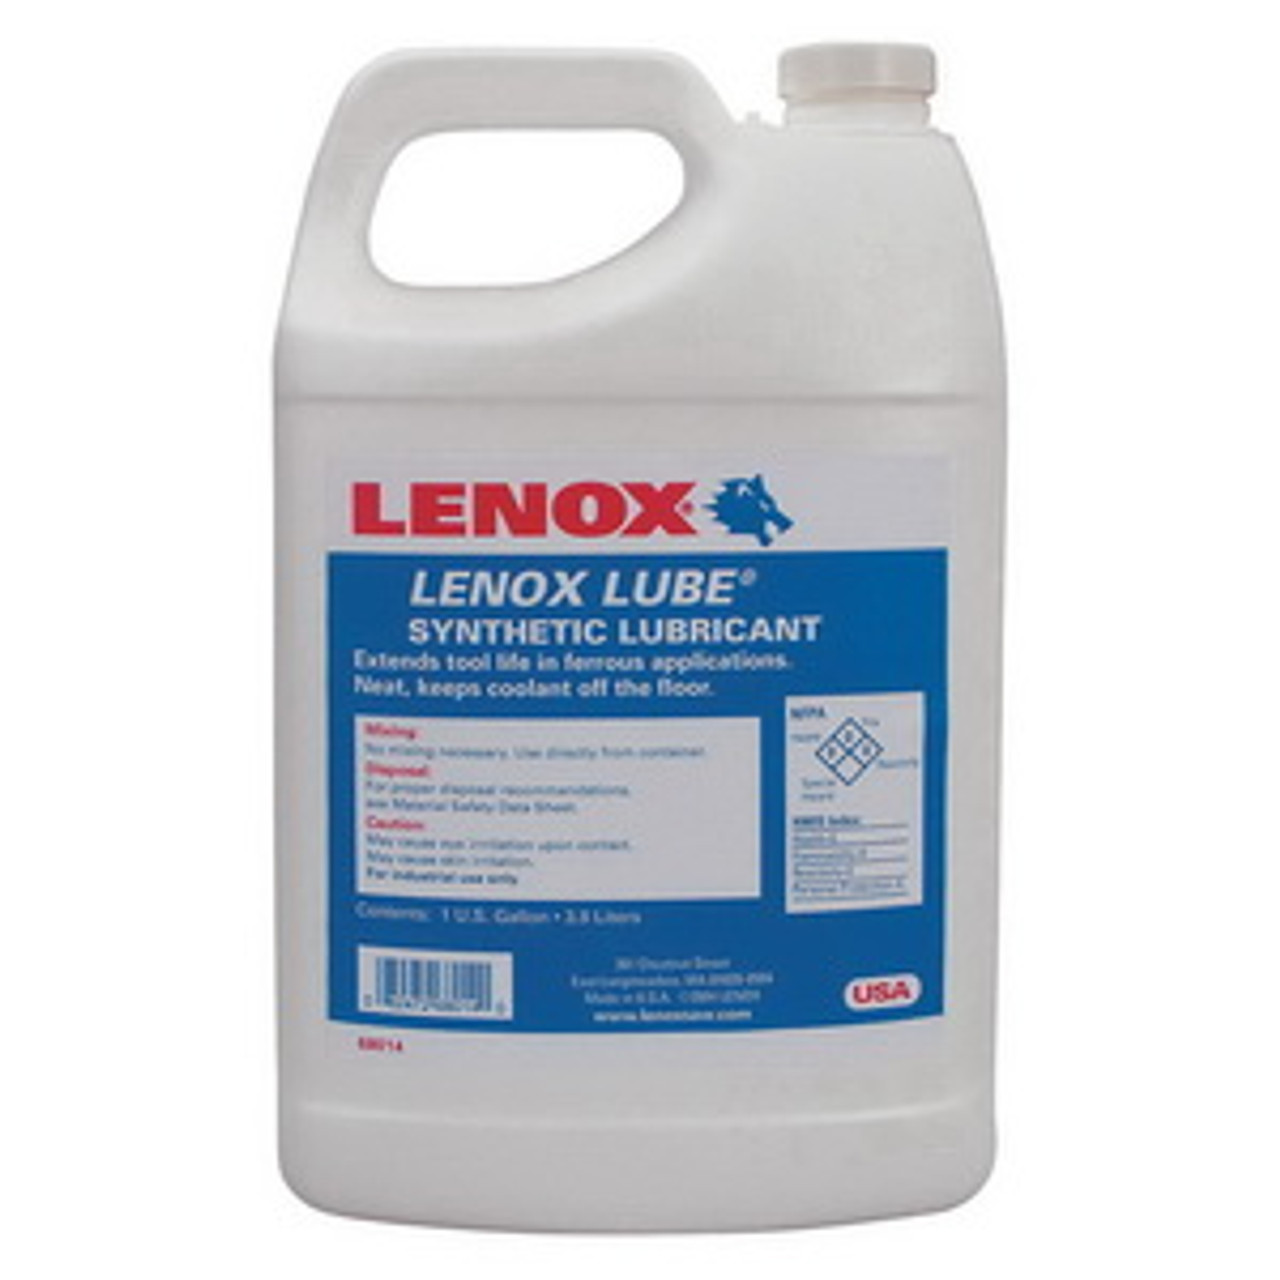 Lenox 68014 BI-Metal Band Saw Blade Cutting Oil, 1 Gallon Container Size